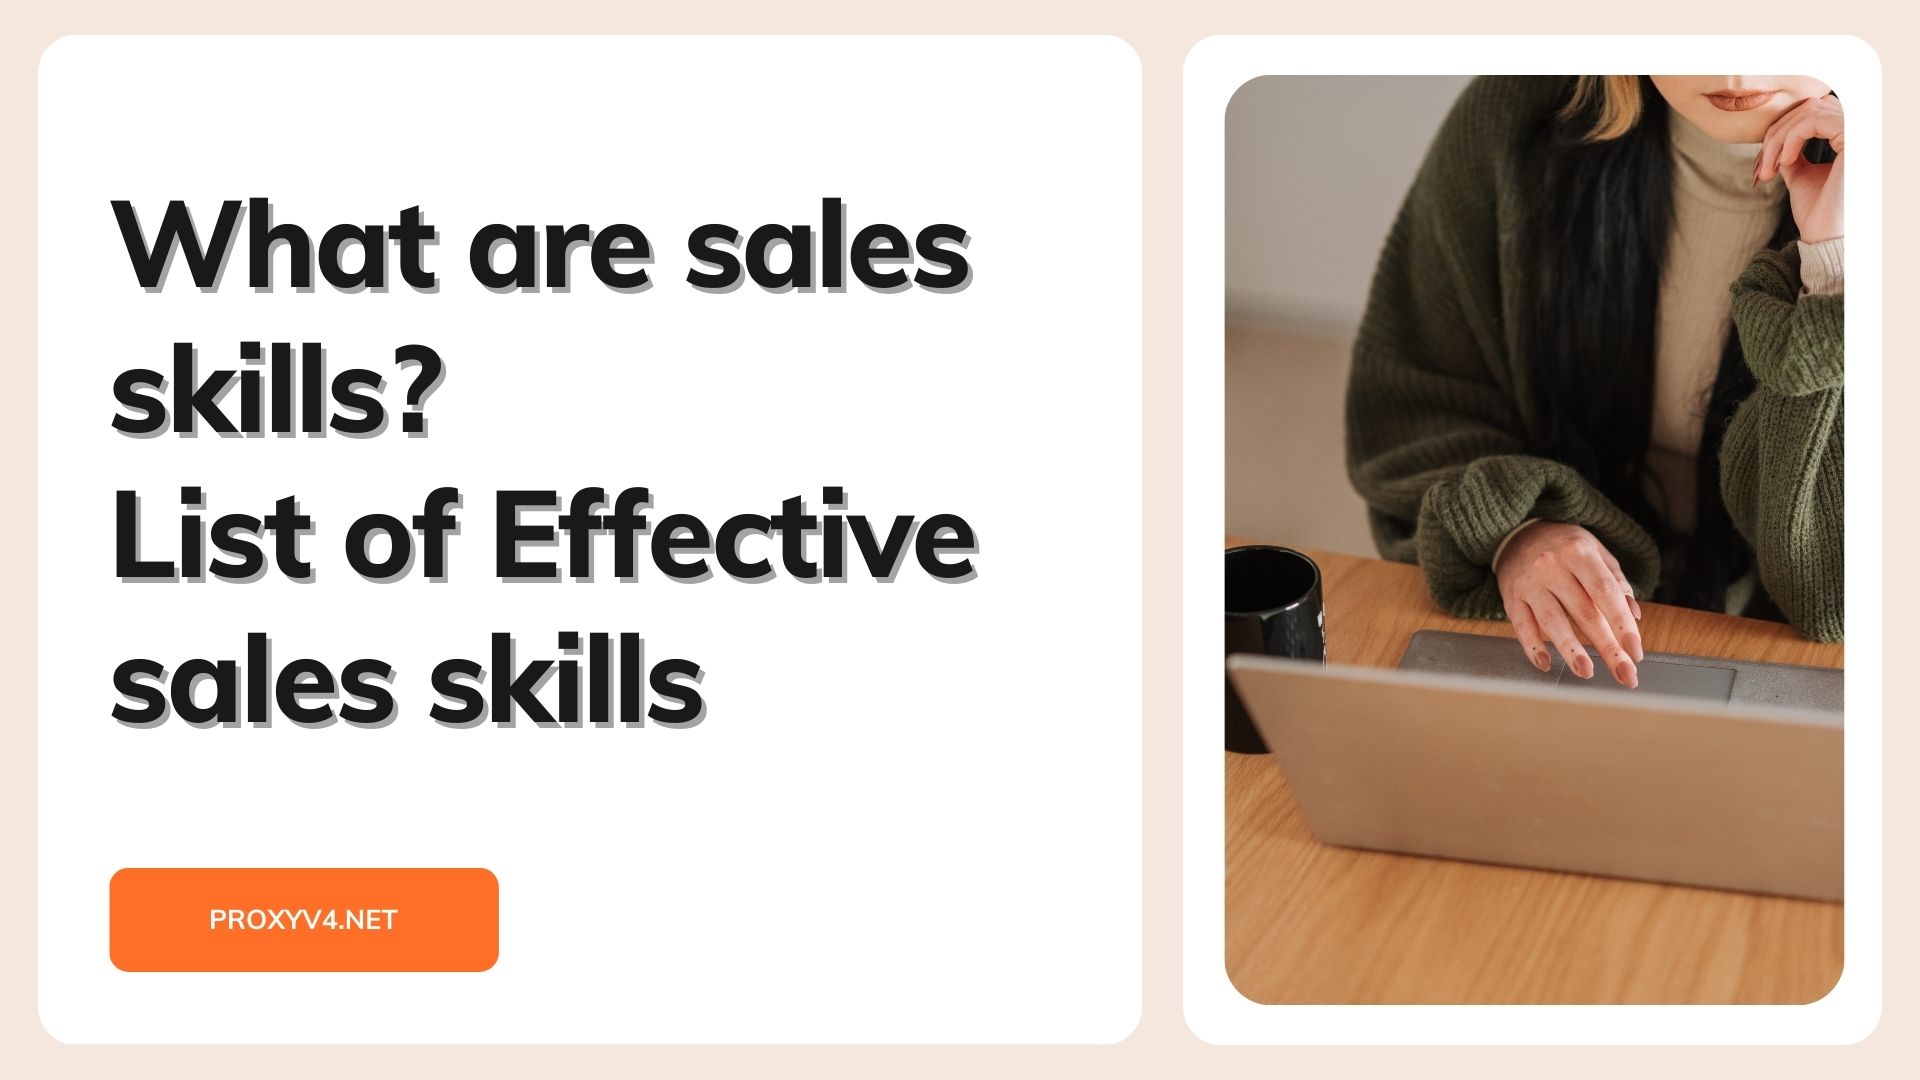 What are sales skills? List of Effective sales skills